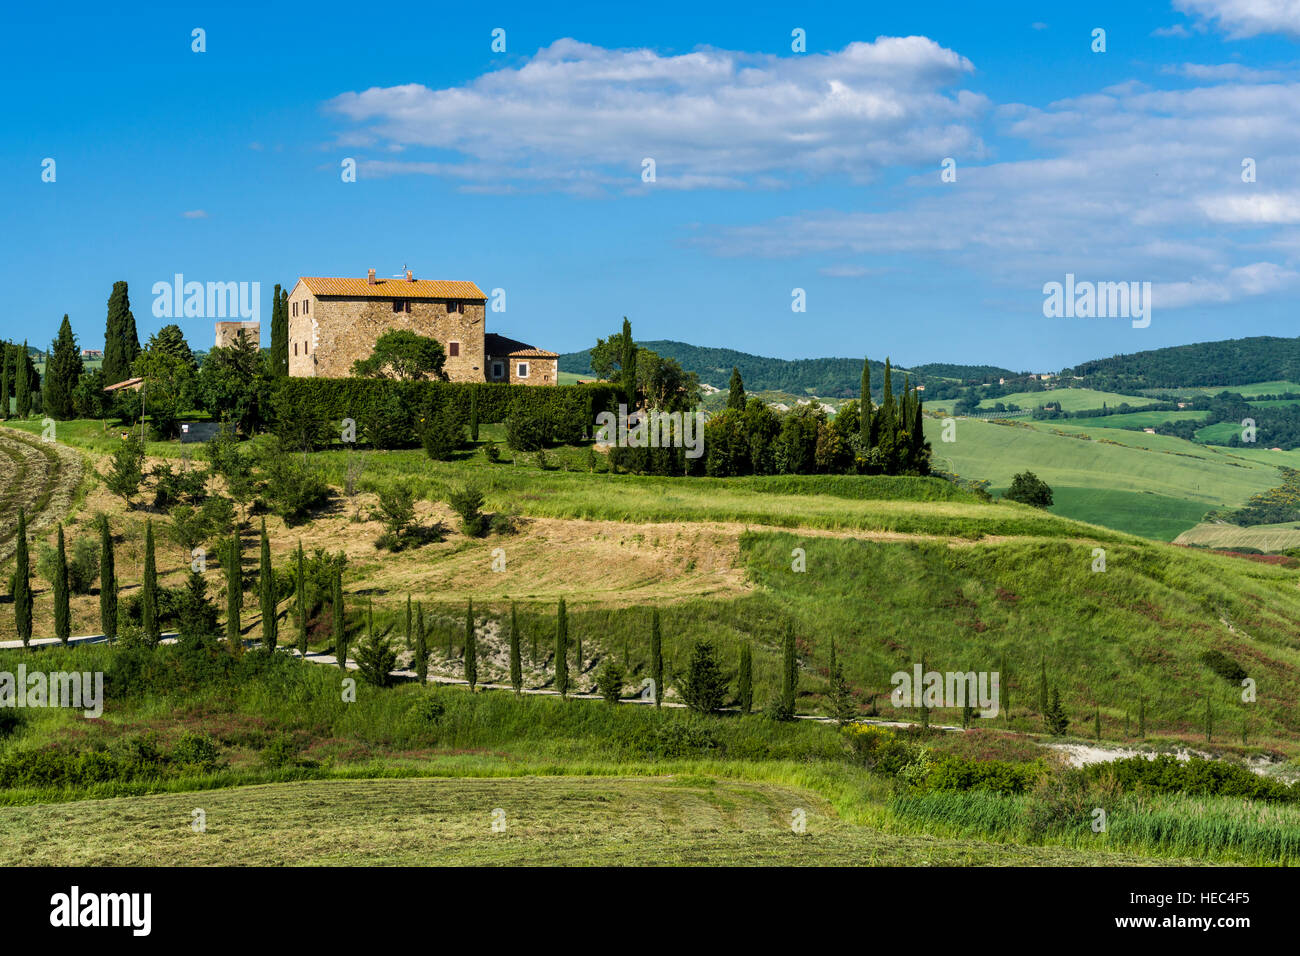 Typical green Tuscany landscape in Val d’Orcia with a farm on a hill, fields, trees, cypresses and blue cloudy sky Stock Photo